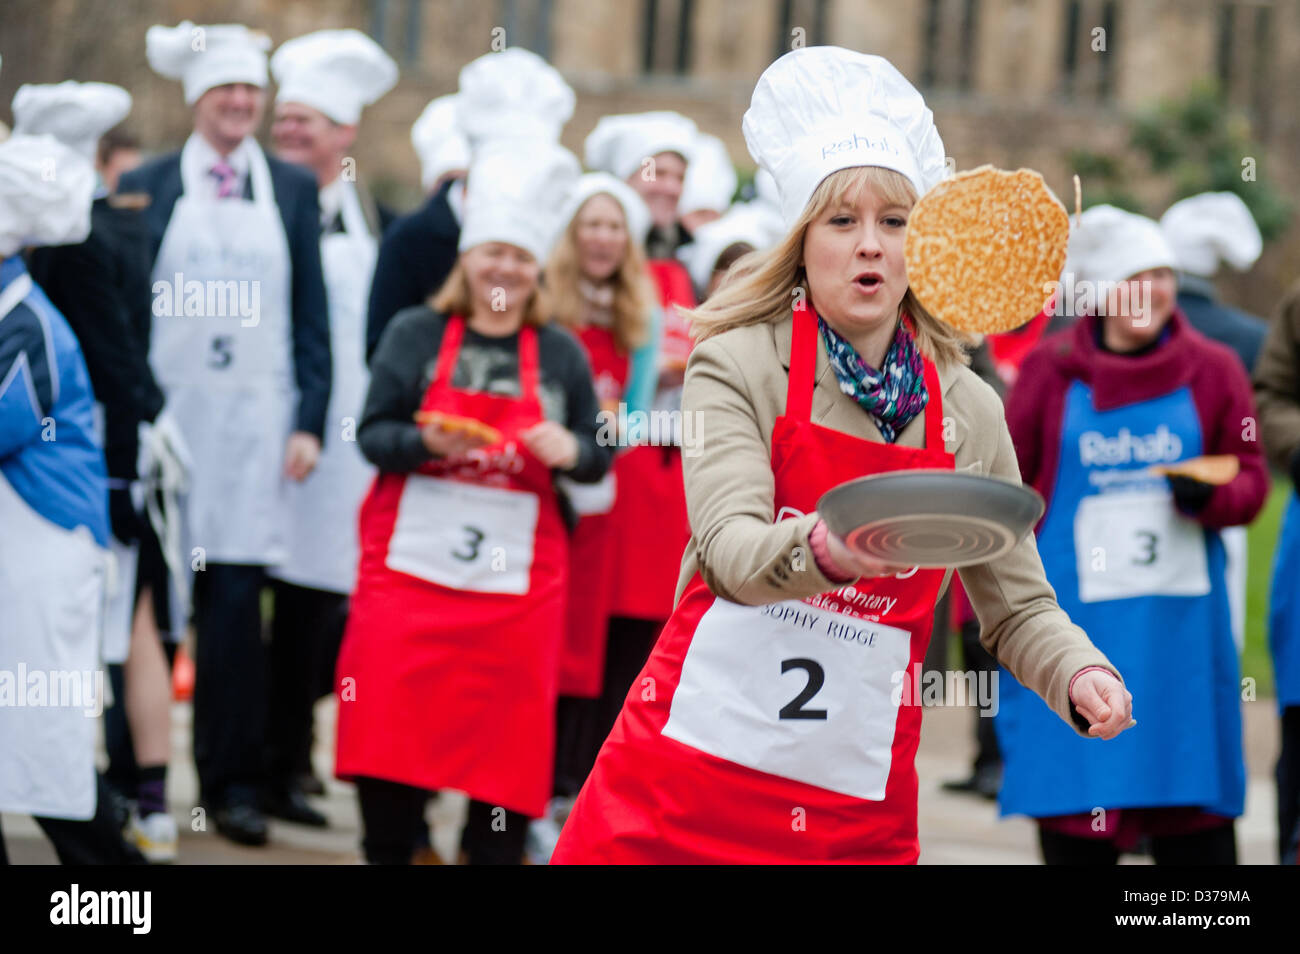 London, UK. 12th February 2013. – the 16th Parliamentary Pancake Race takes place next to the Houses of Parliament on Shrove Tuesday raising money for the charity Rehab. Politicians and MPs toss pancakes into the air and catch them in the pan whilst running.The team of MPs has won the event this year. pcruciatti / Alamy Live News Stock Photo